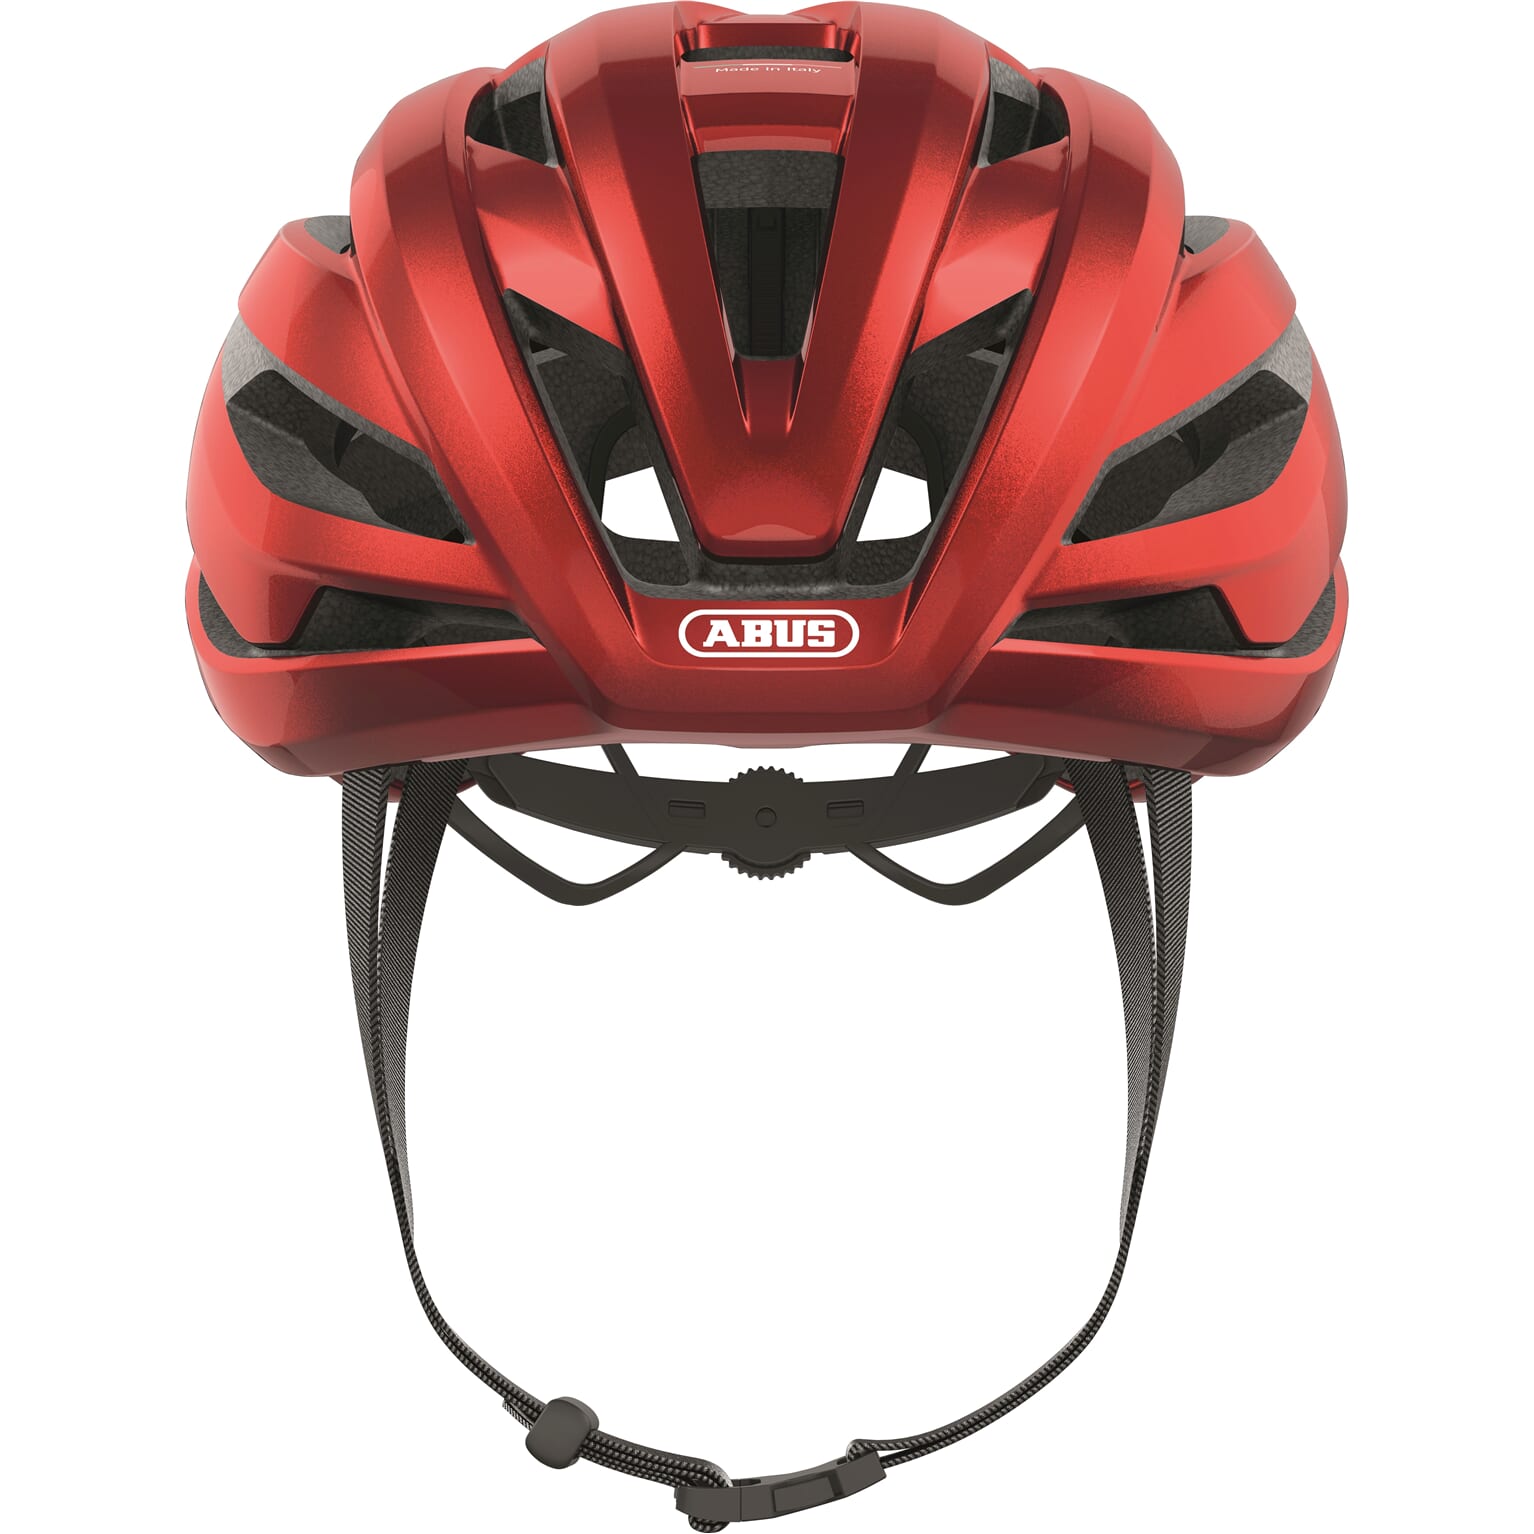 Abus helm Stormchaser ACE performance red S 51-55cm